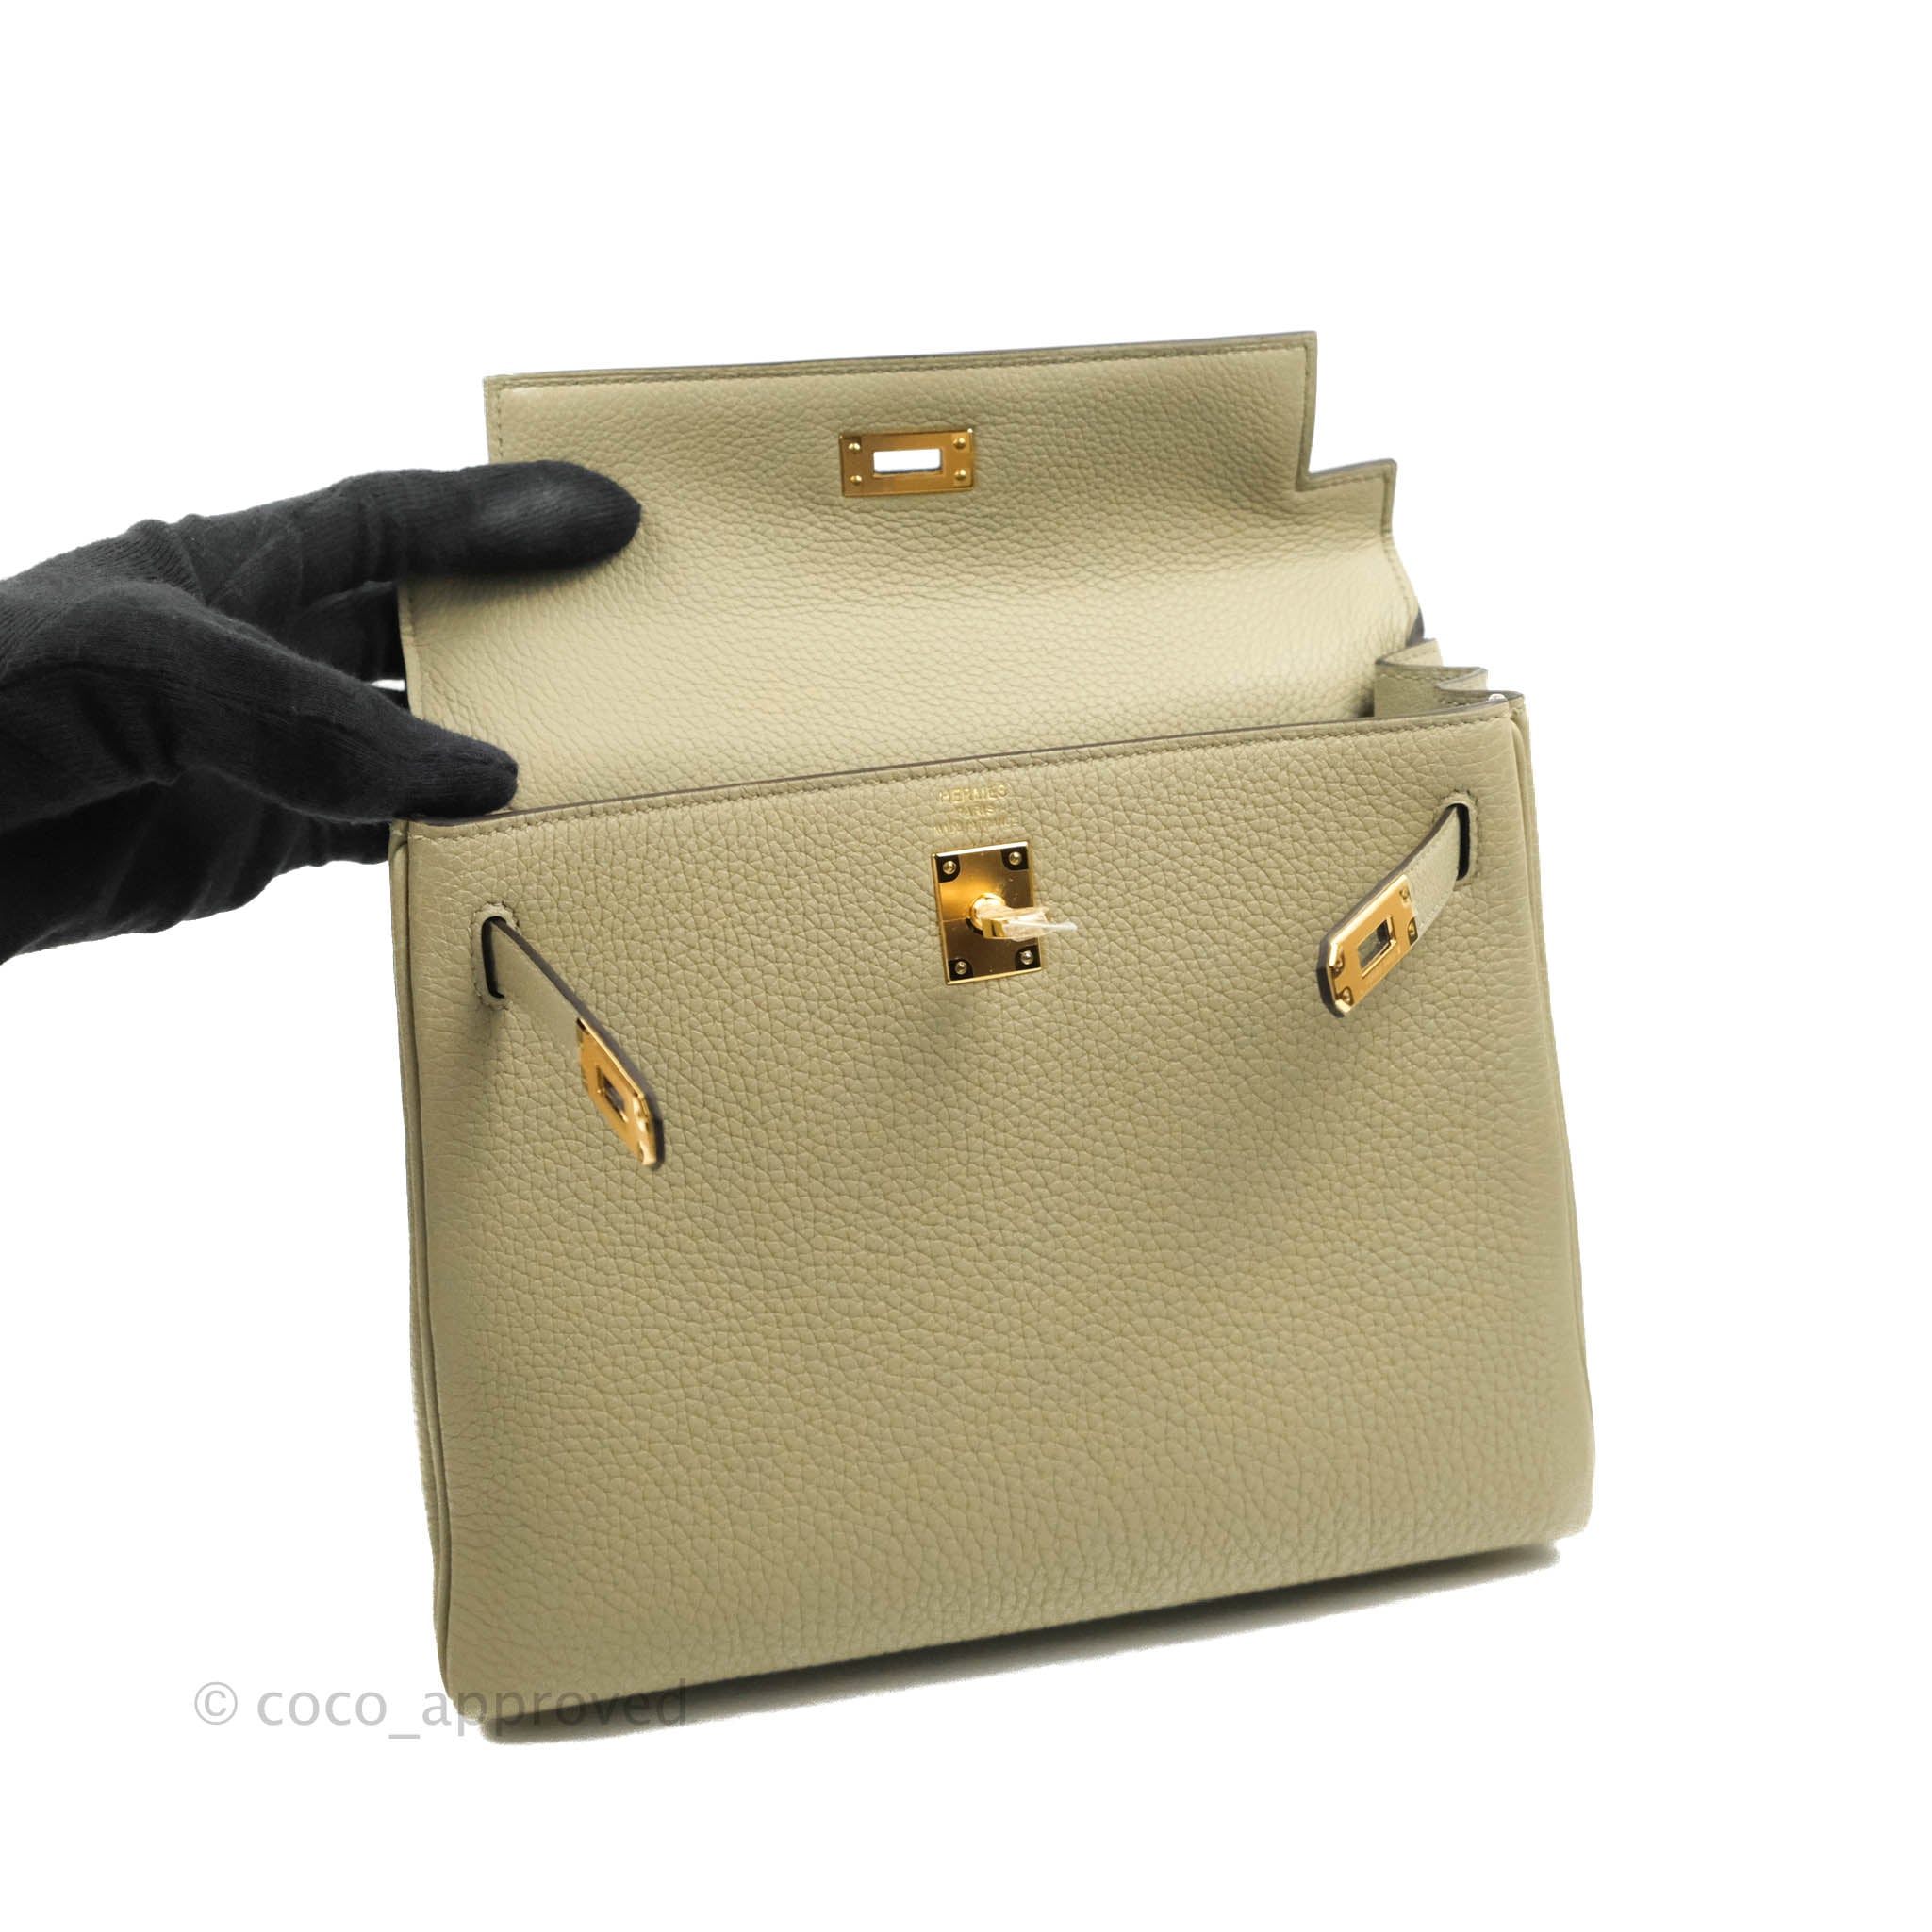 Hermès Kelly 25 Rouge H Sellier Box Gold Hardware GHW — The French